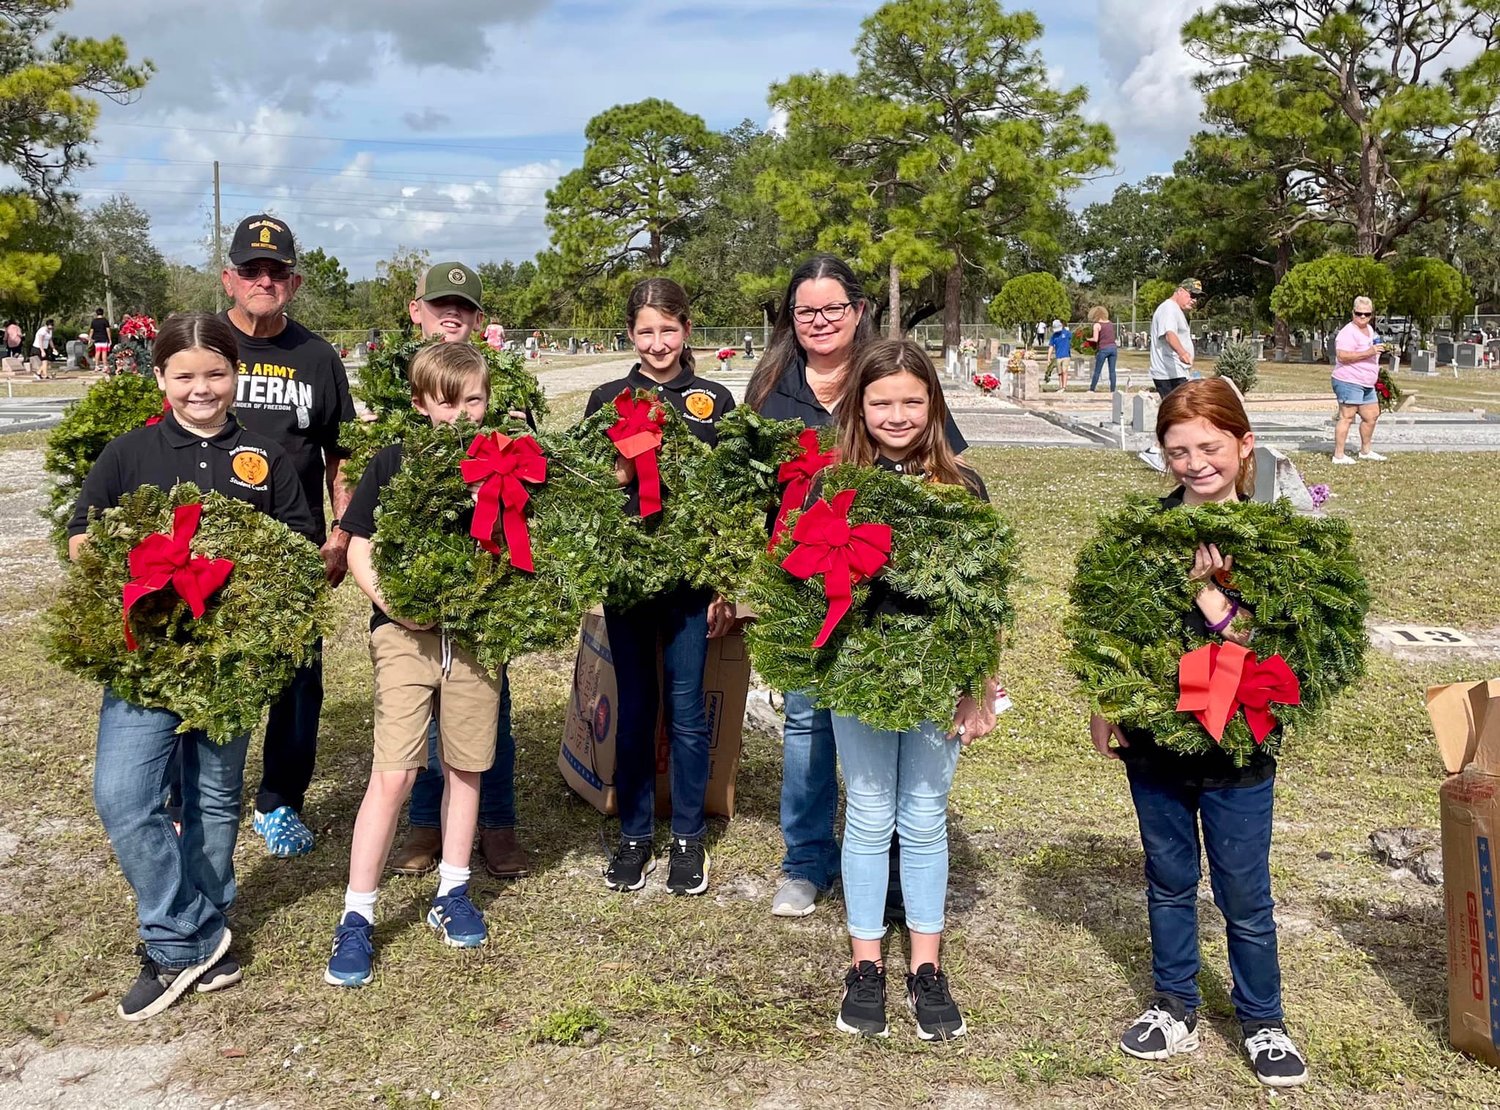 North Elementary School's student council place wreaths on the graves of fallen veterans.